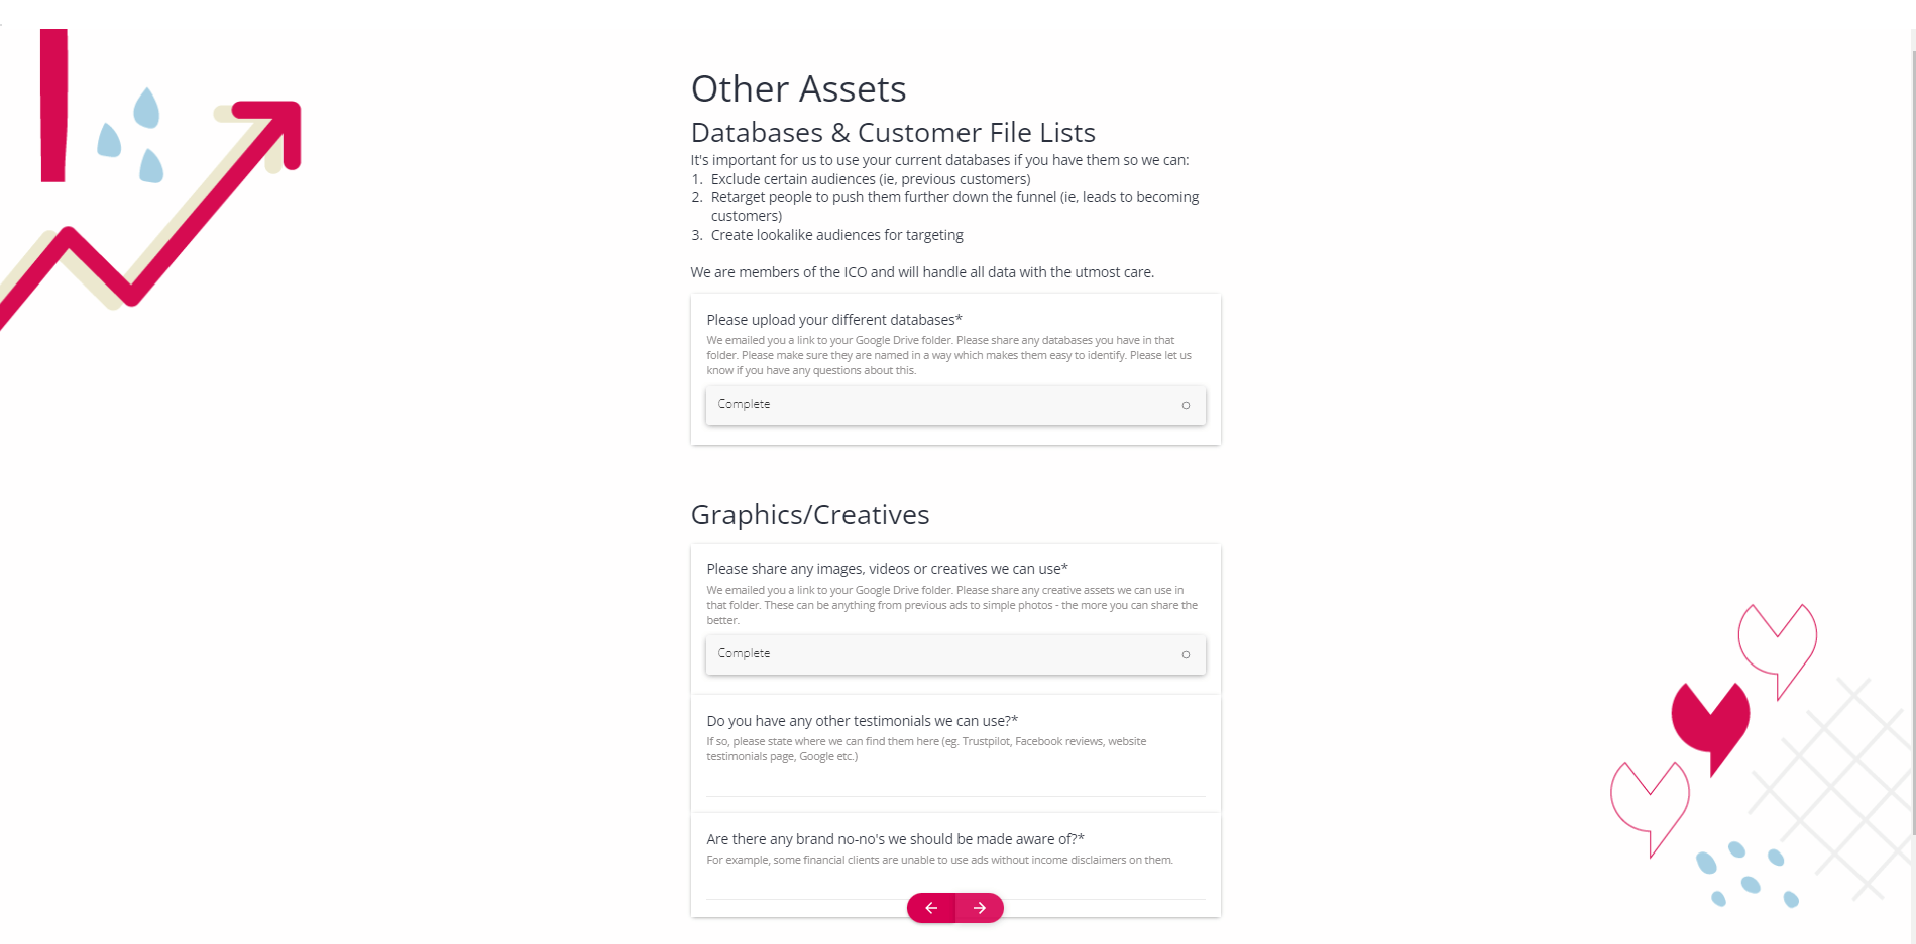 Yatter onboarding form - Other Assests section